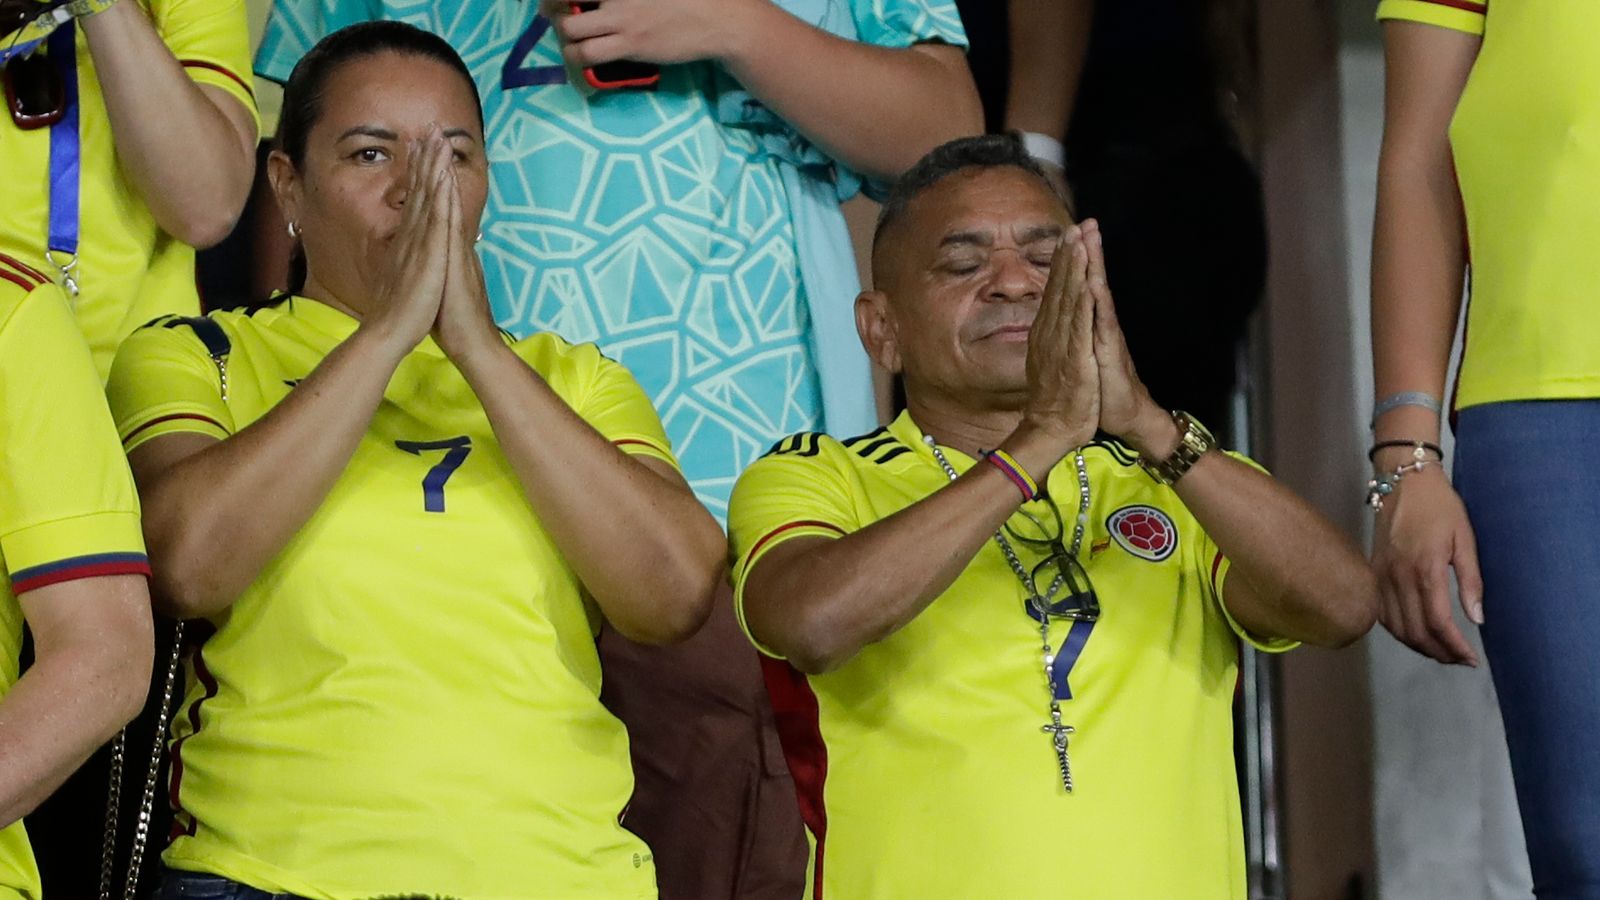 Luis Diaz’s father weeps as his son scores twice for Colombia against Brazil days after release by kidnappers